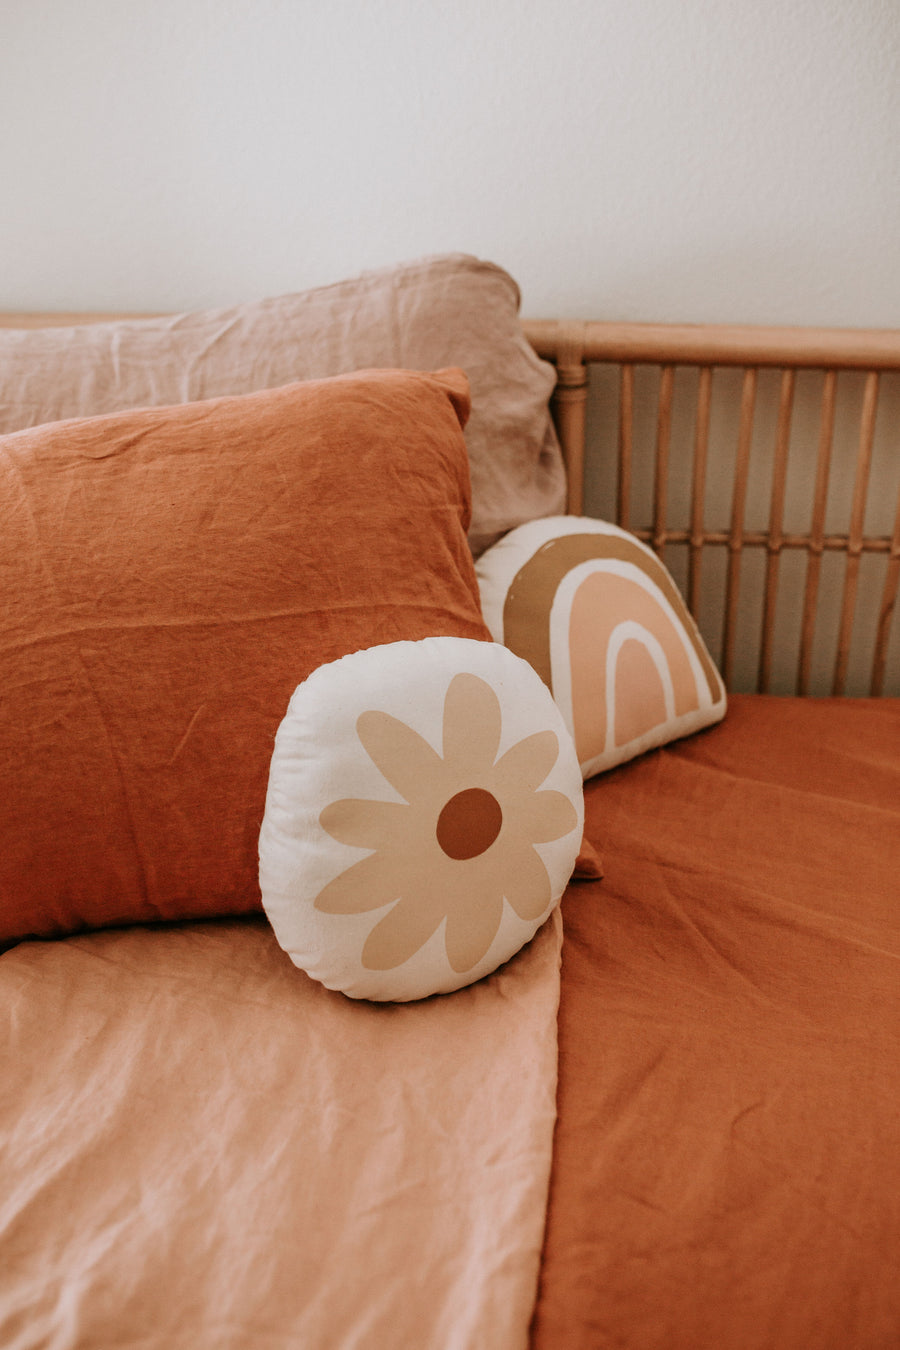 Bed with earth red and peach pillows and sheets with artisan made accent pillows. Accent pillows have rainbow and flower designs. All home goods made at fair trade ethical facility with sustainably sourced materials.